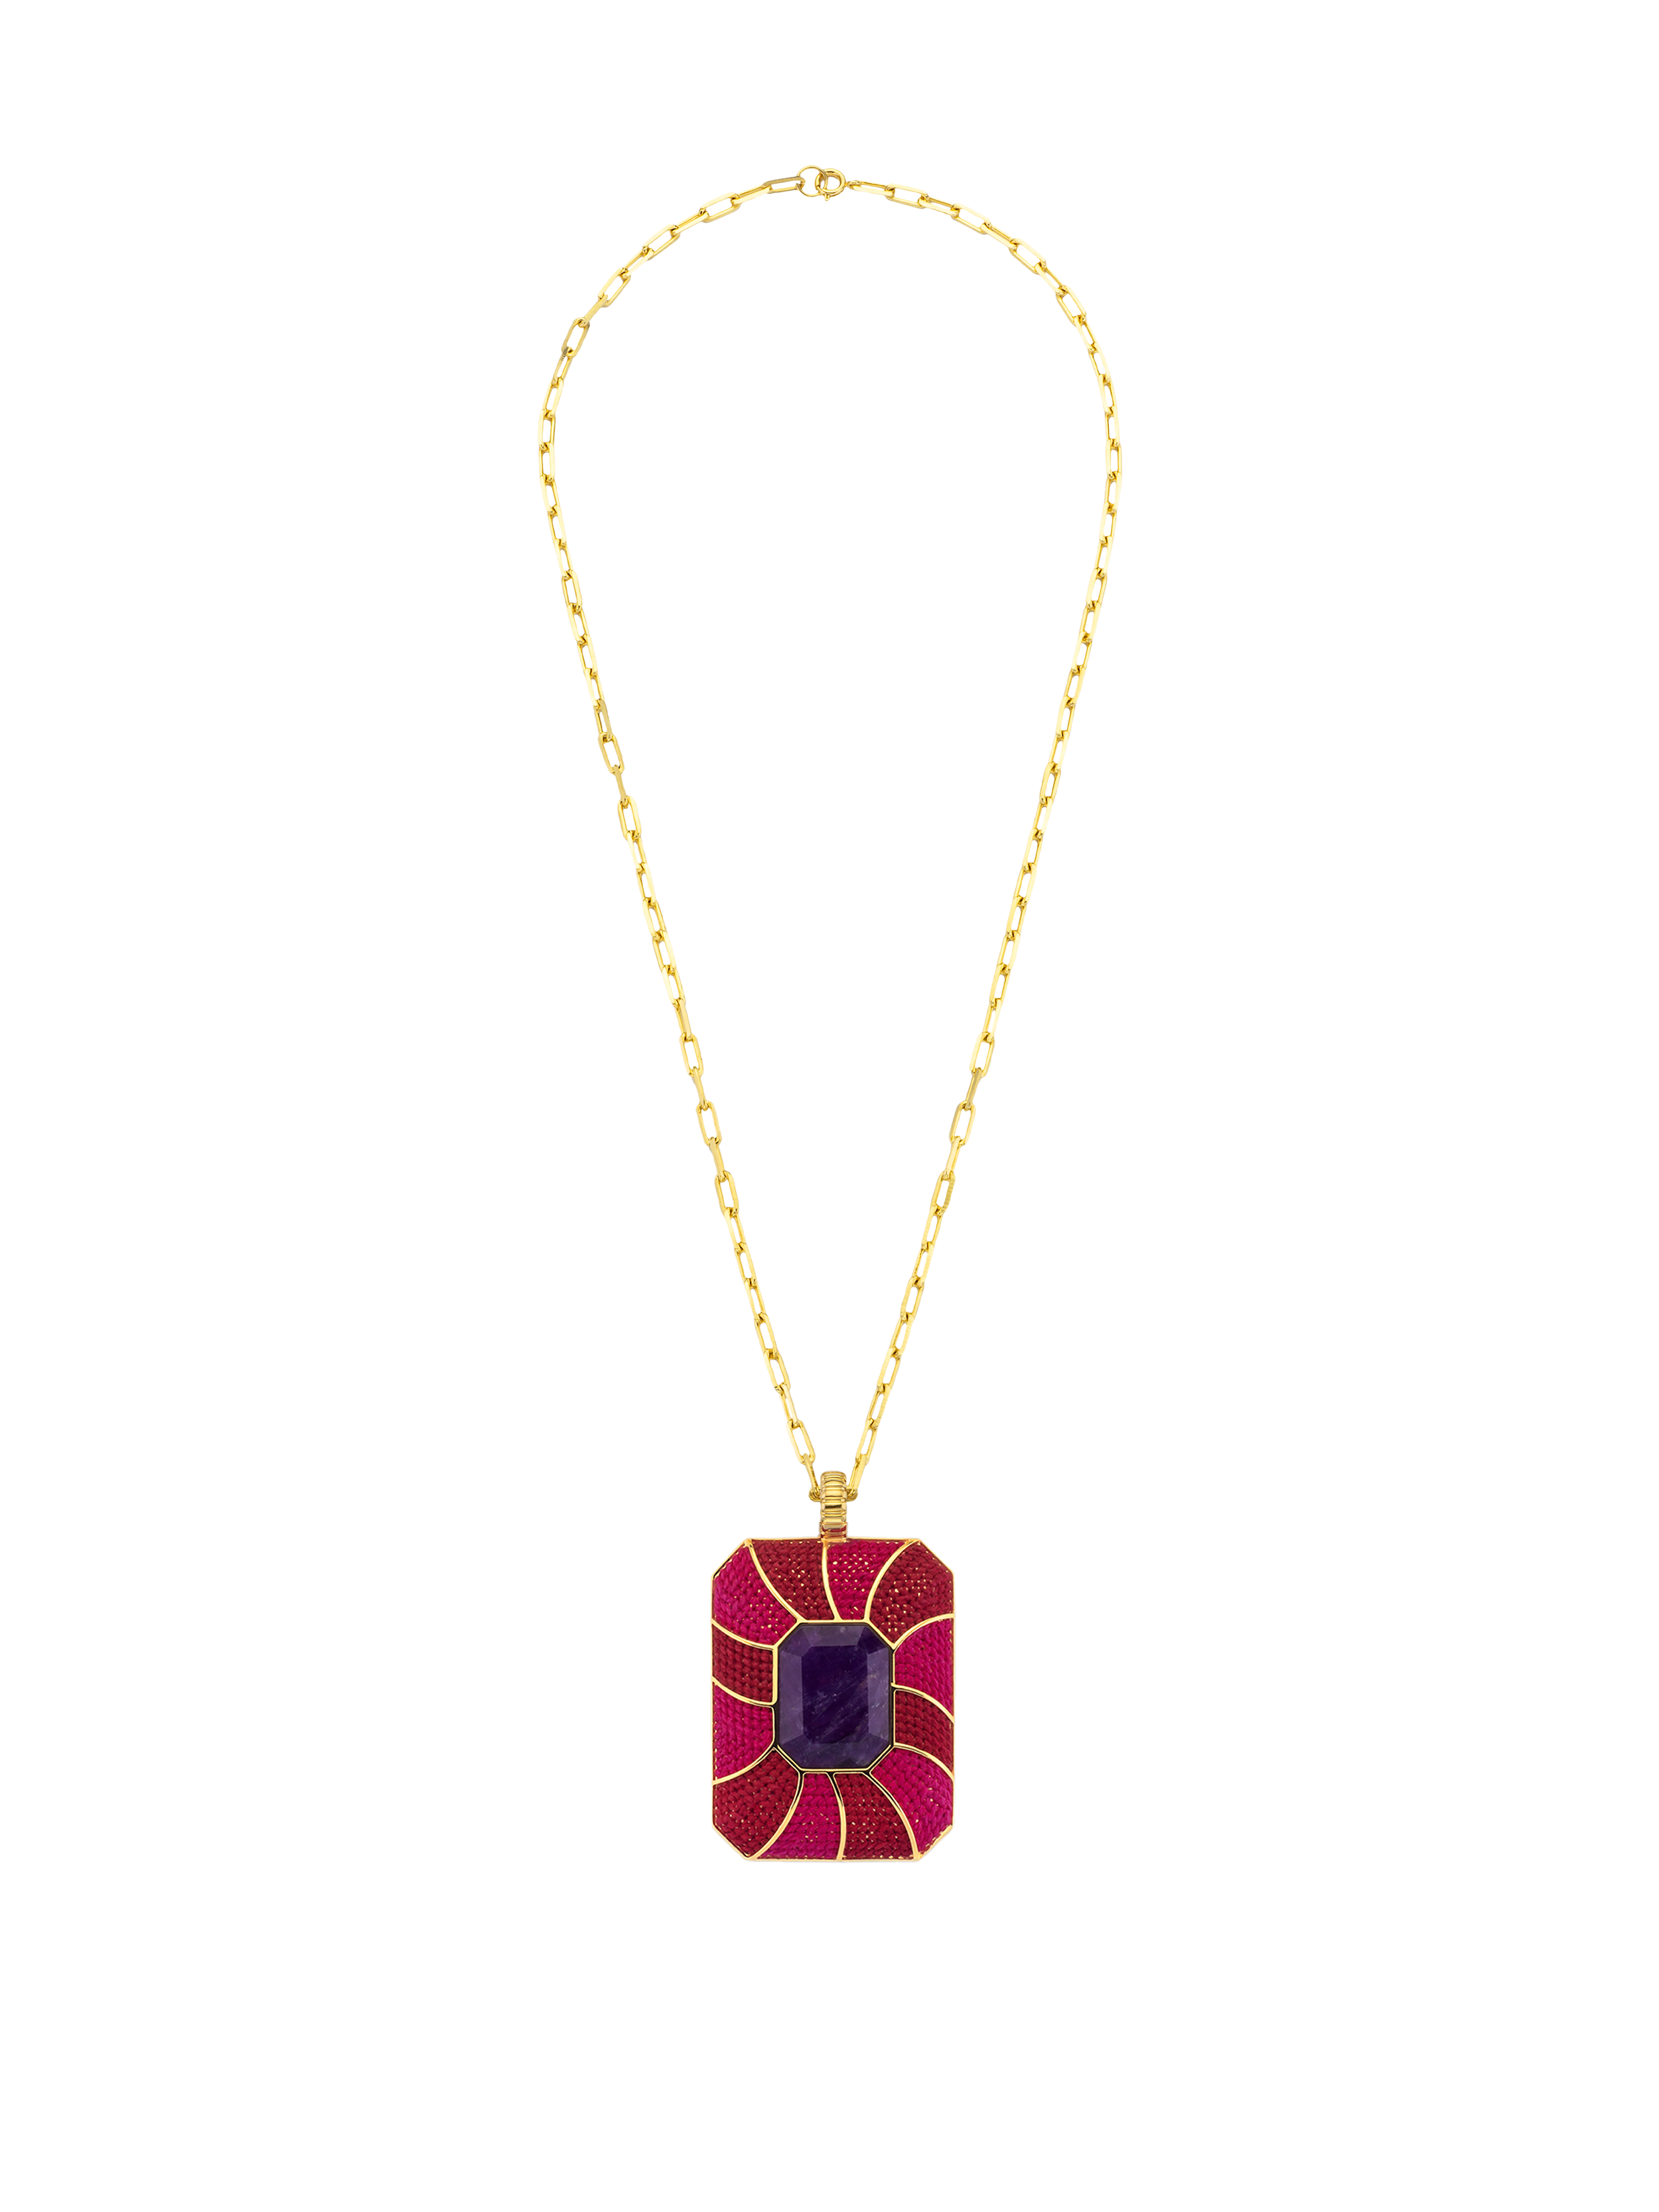 Lolly Necklace - Red and Pink